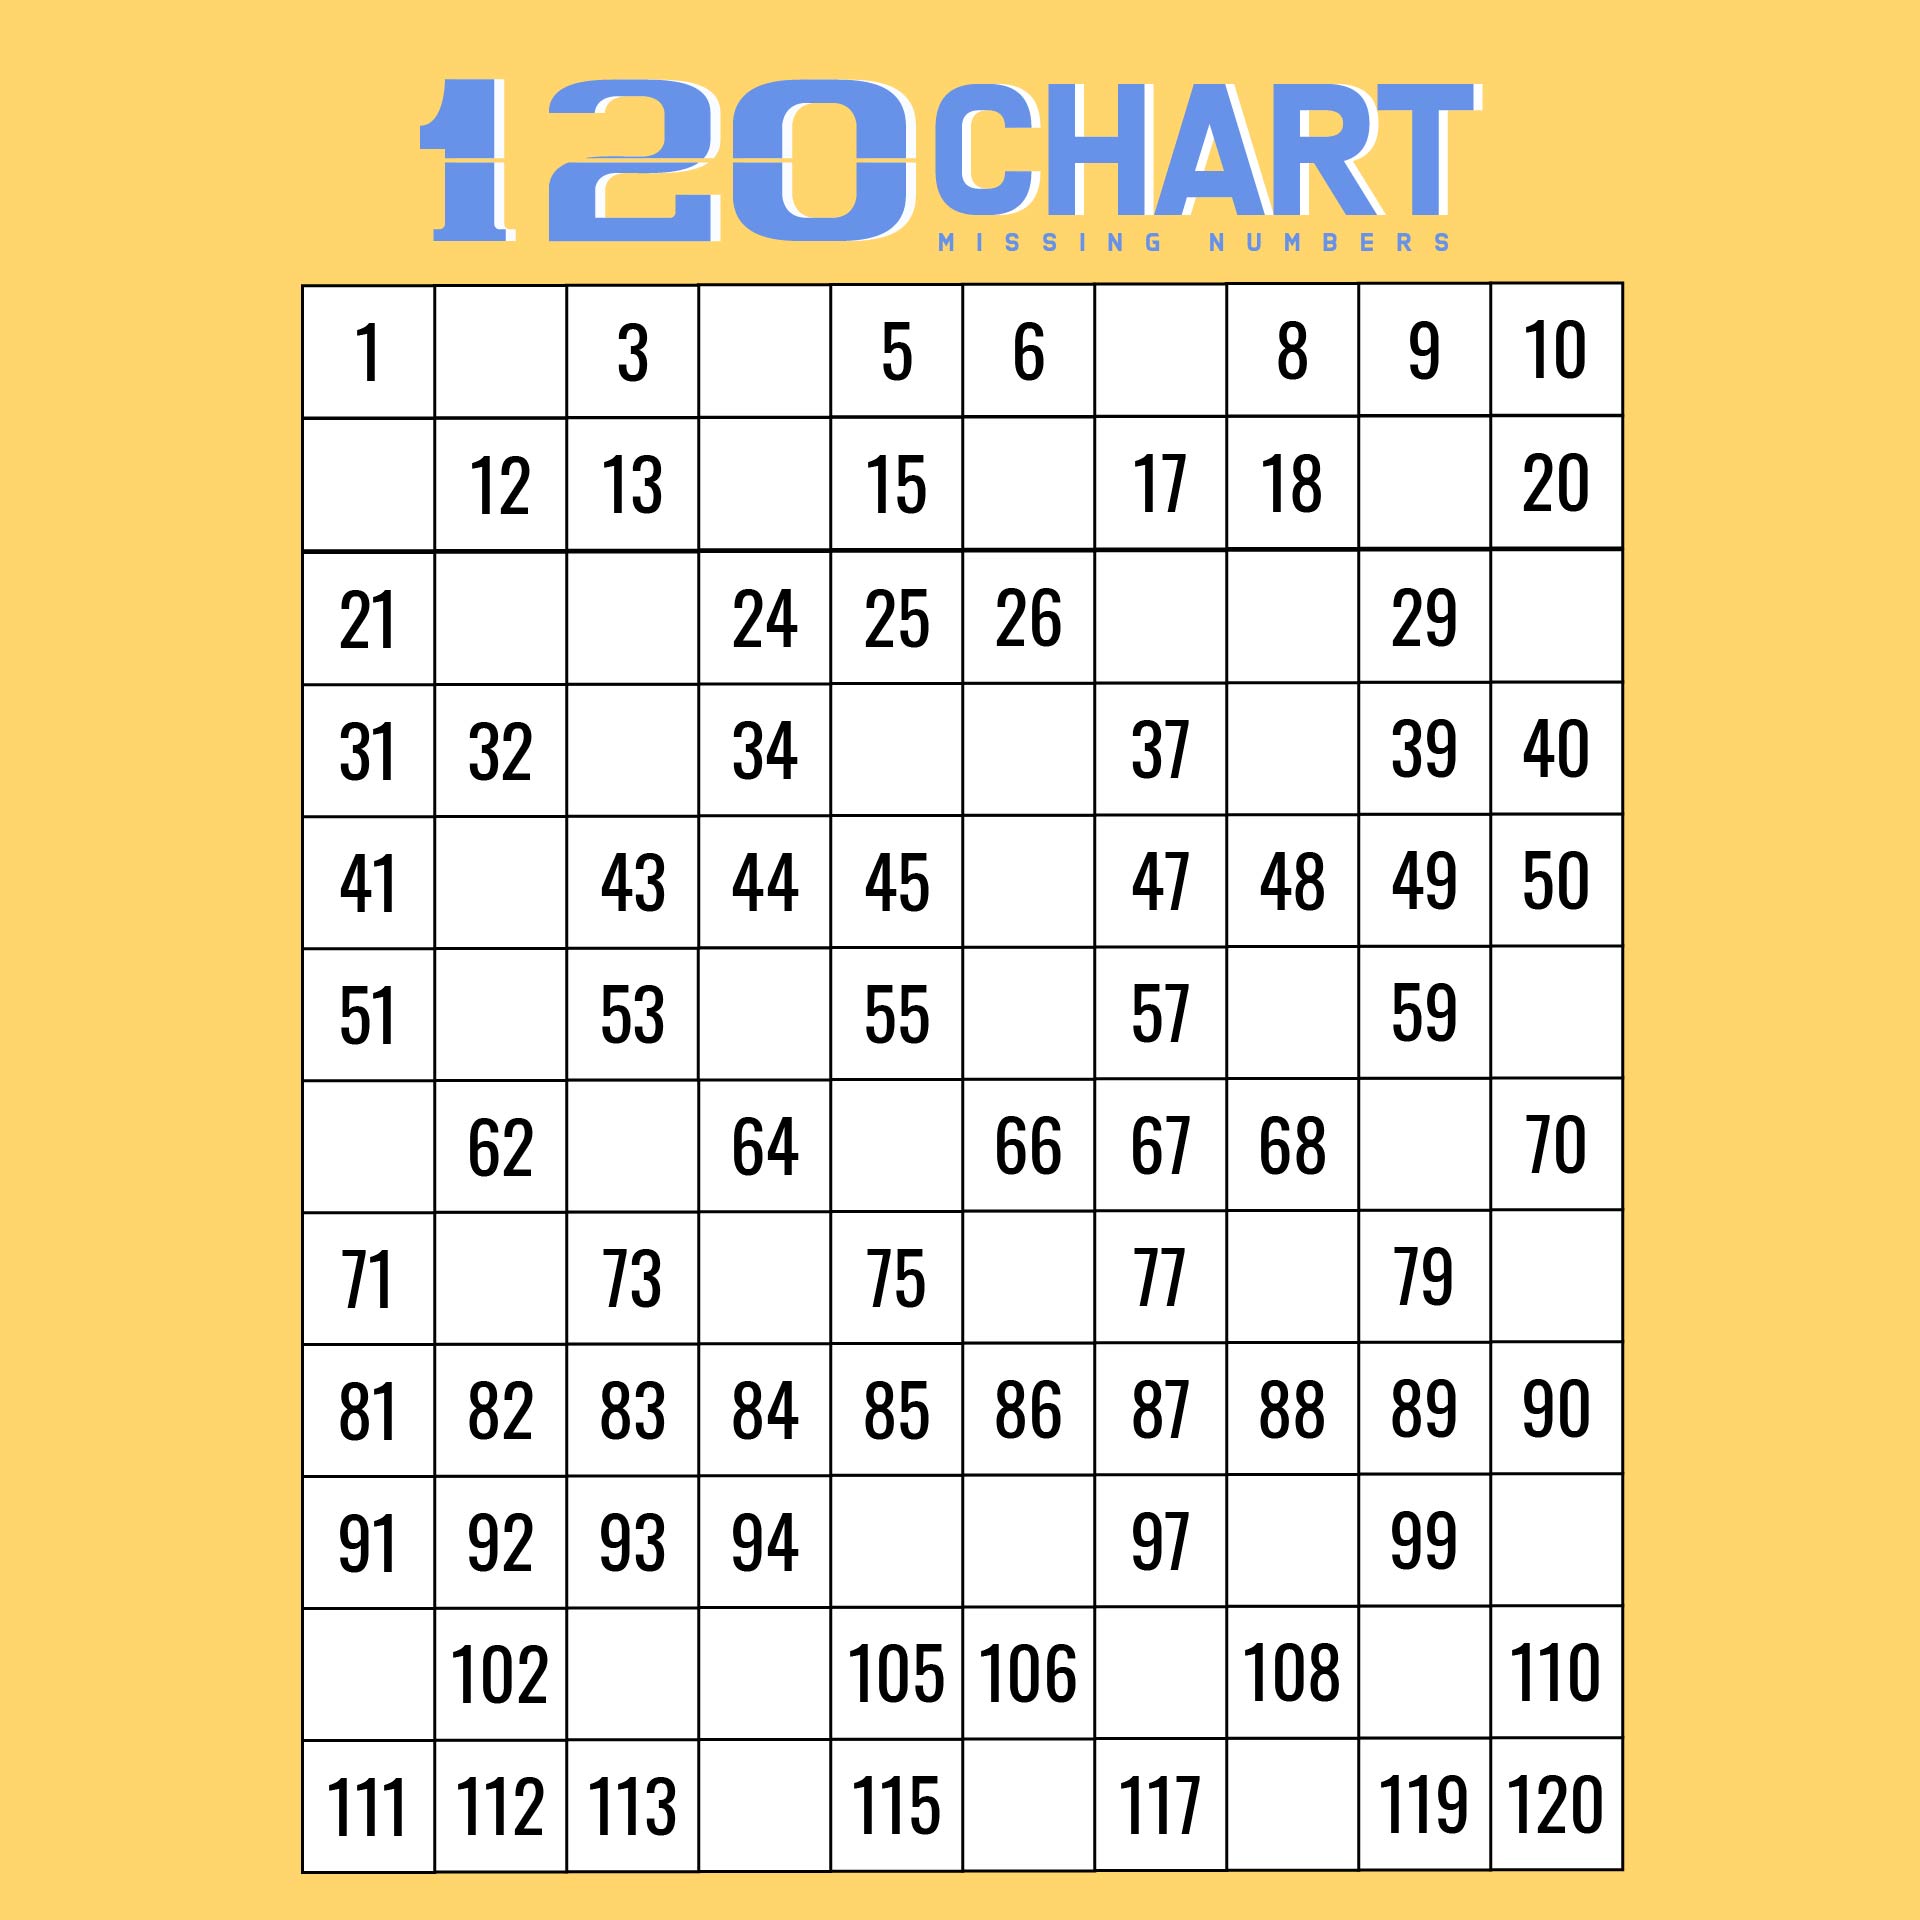 Free Printable 120 Chart With Missing Numbers